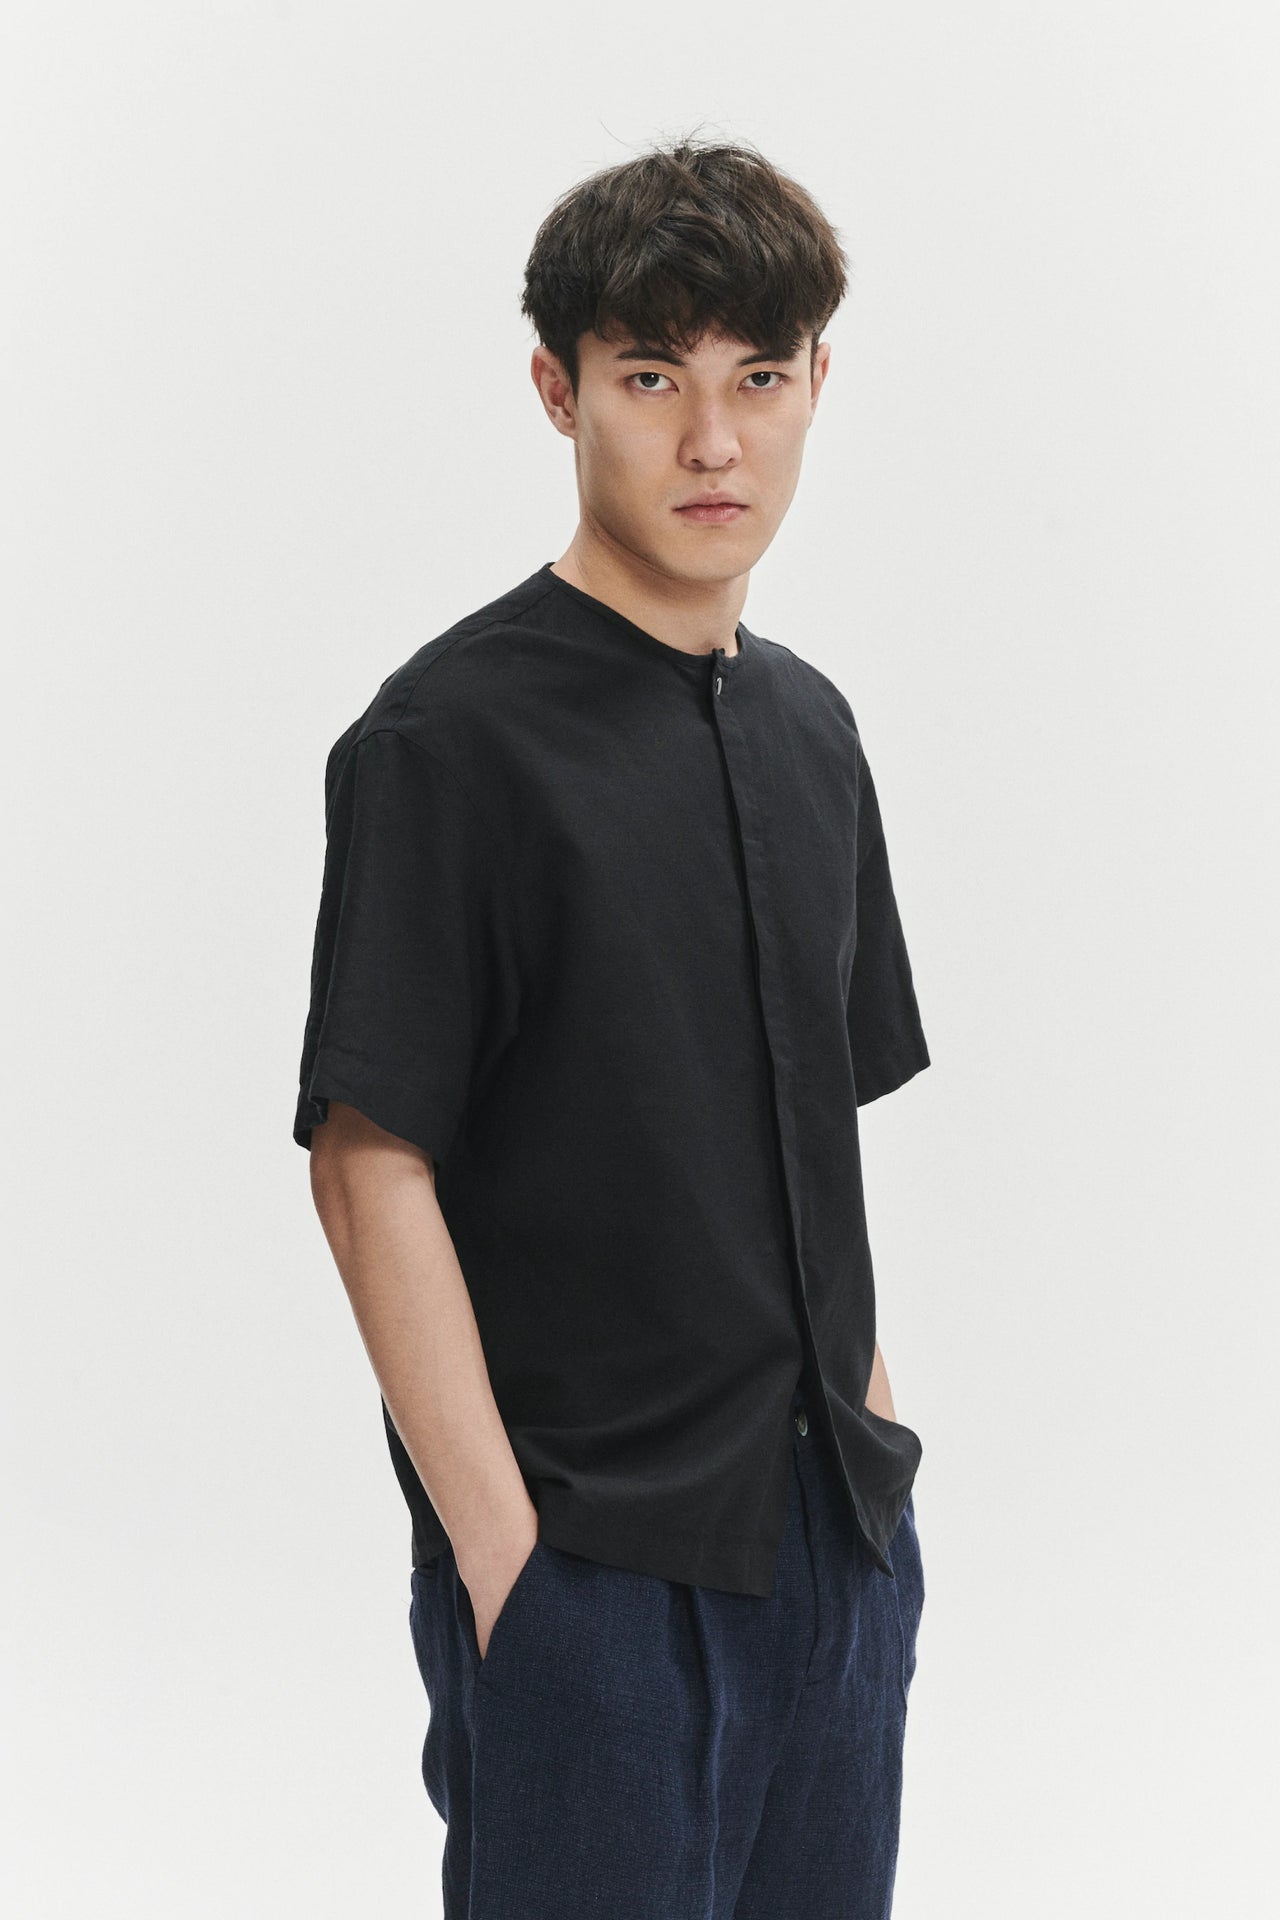 Short Sleeve Minimal Shirt in a Black Fine Portuguese Cotton and Linen